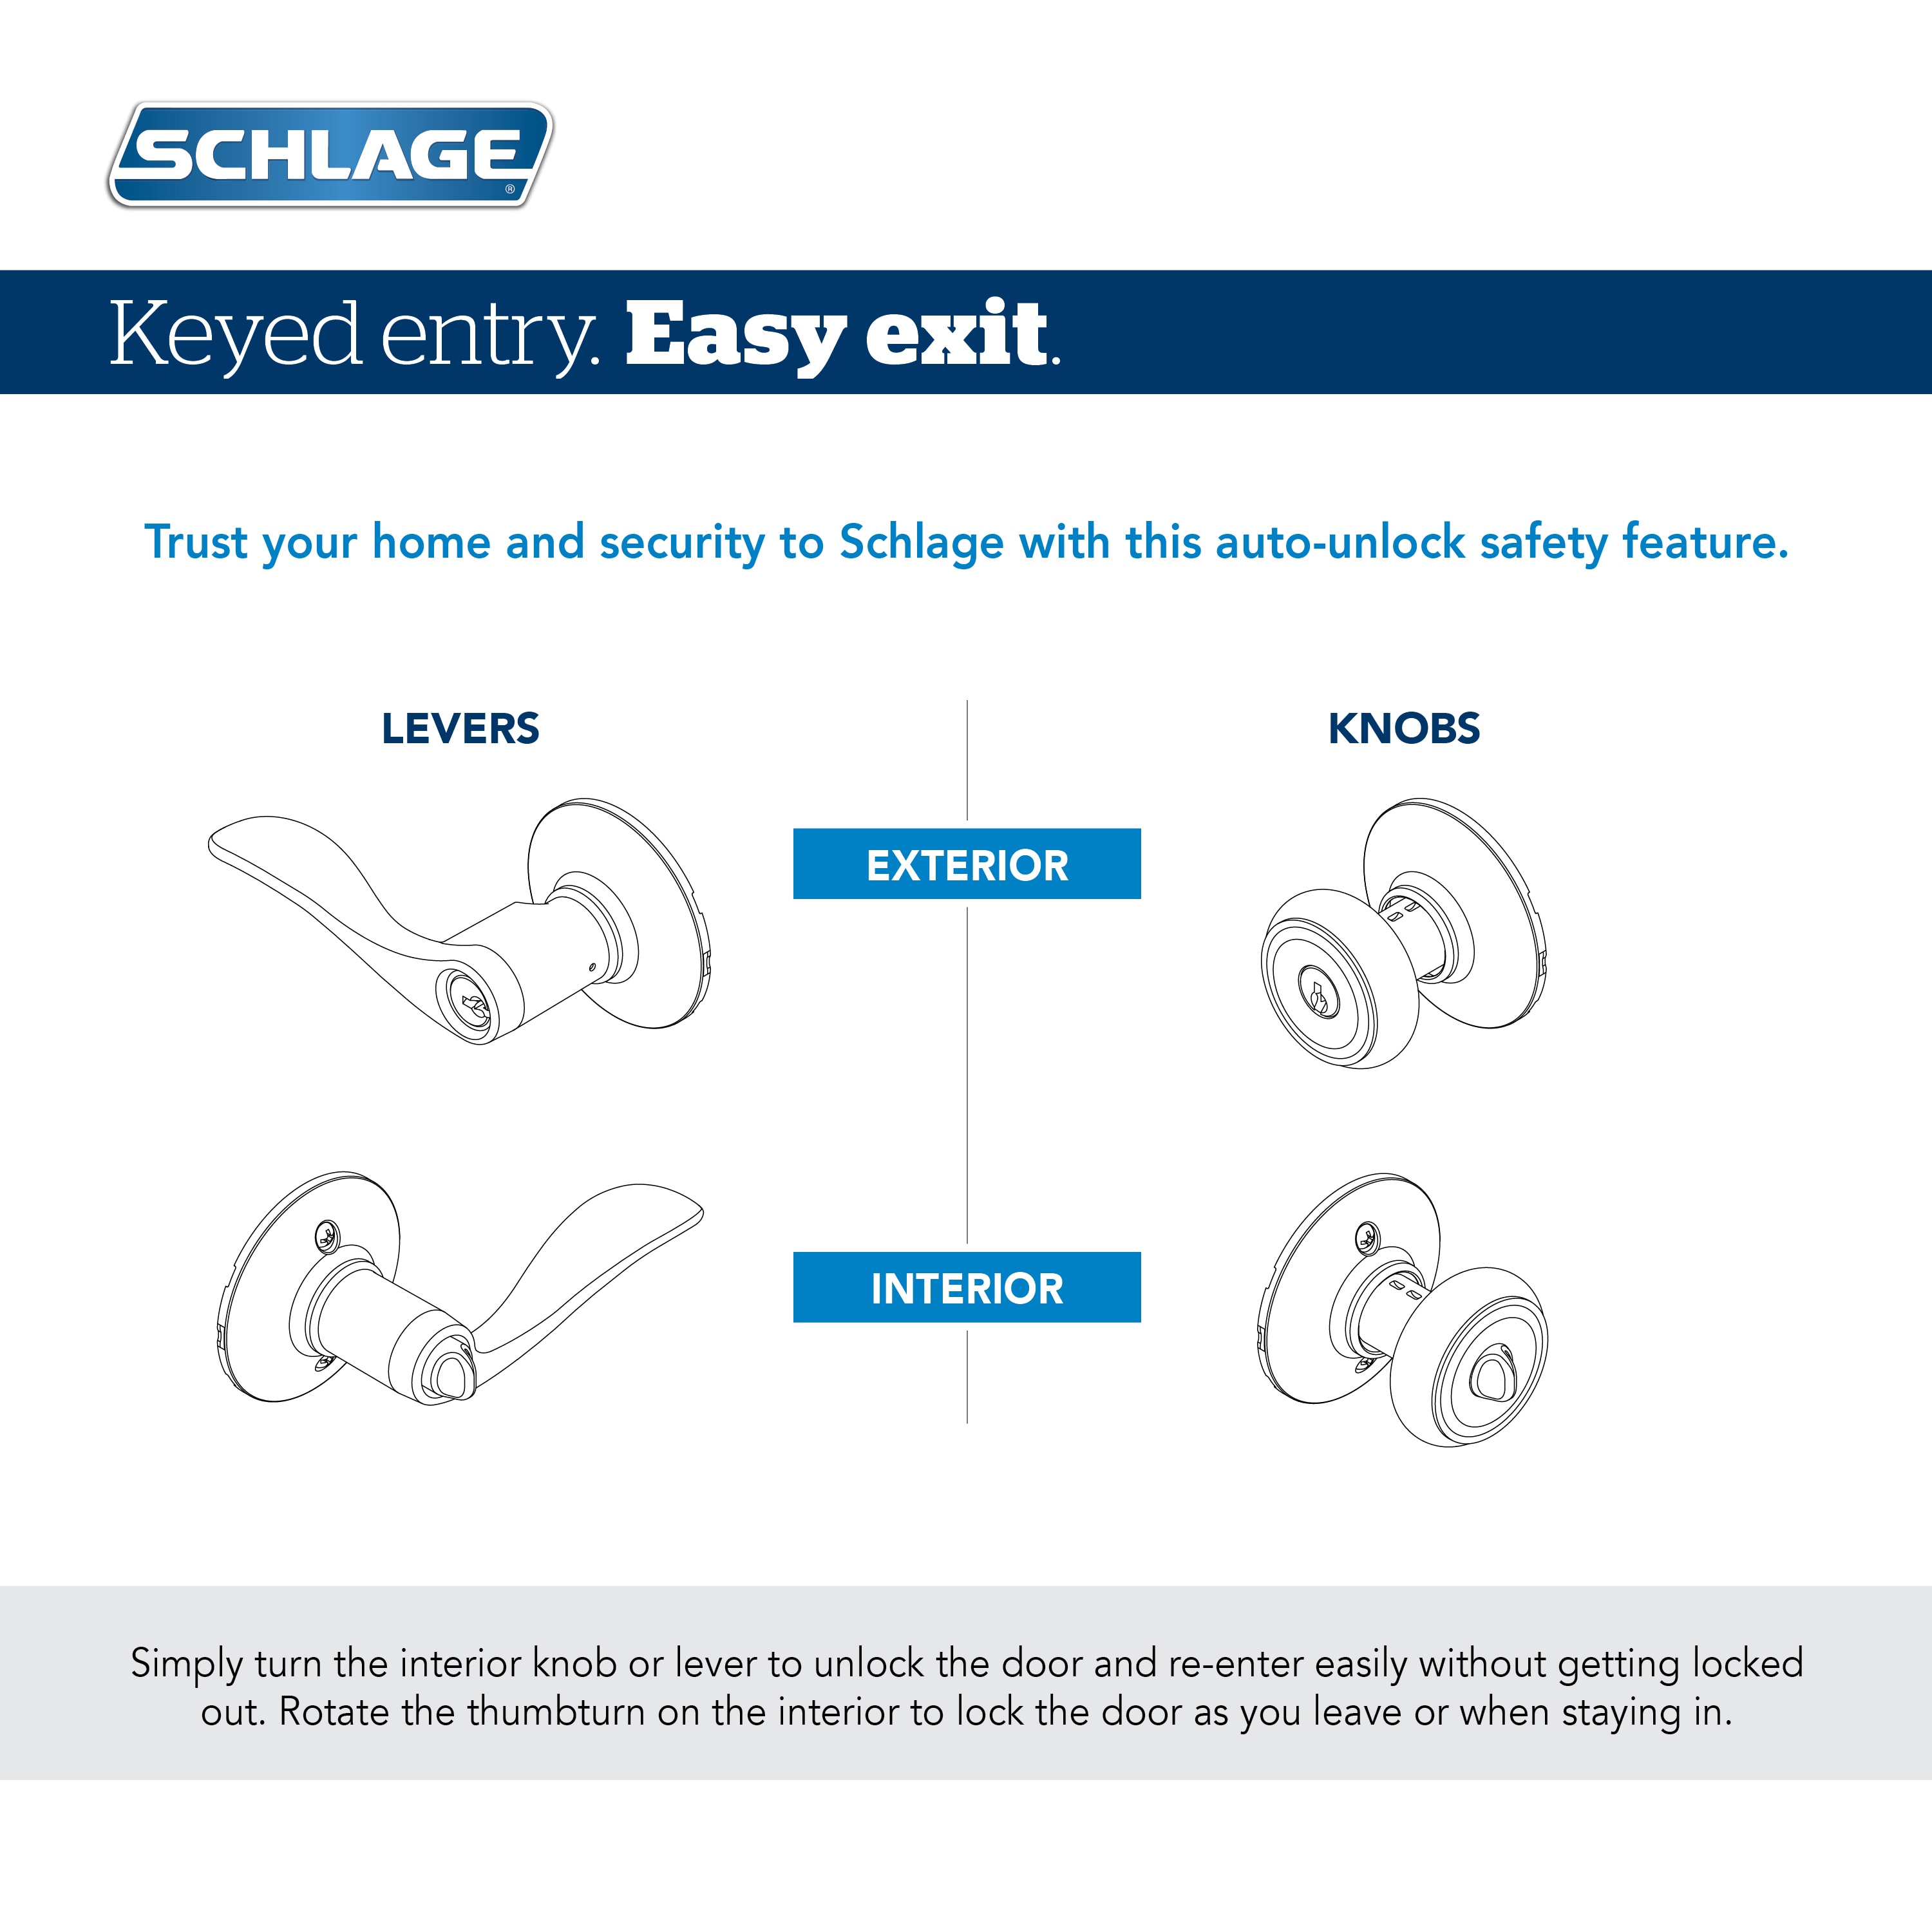 Schlage Flair Bright Brass Exterior Keyed Entry Door Handle in the